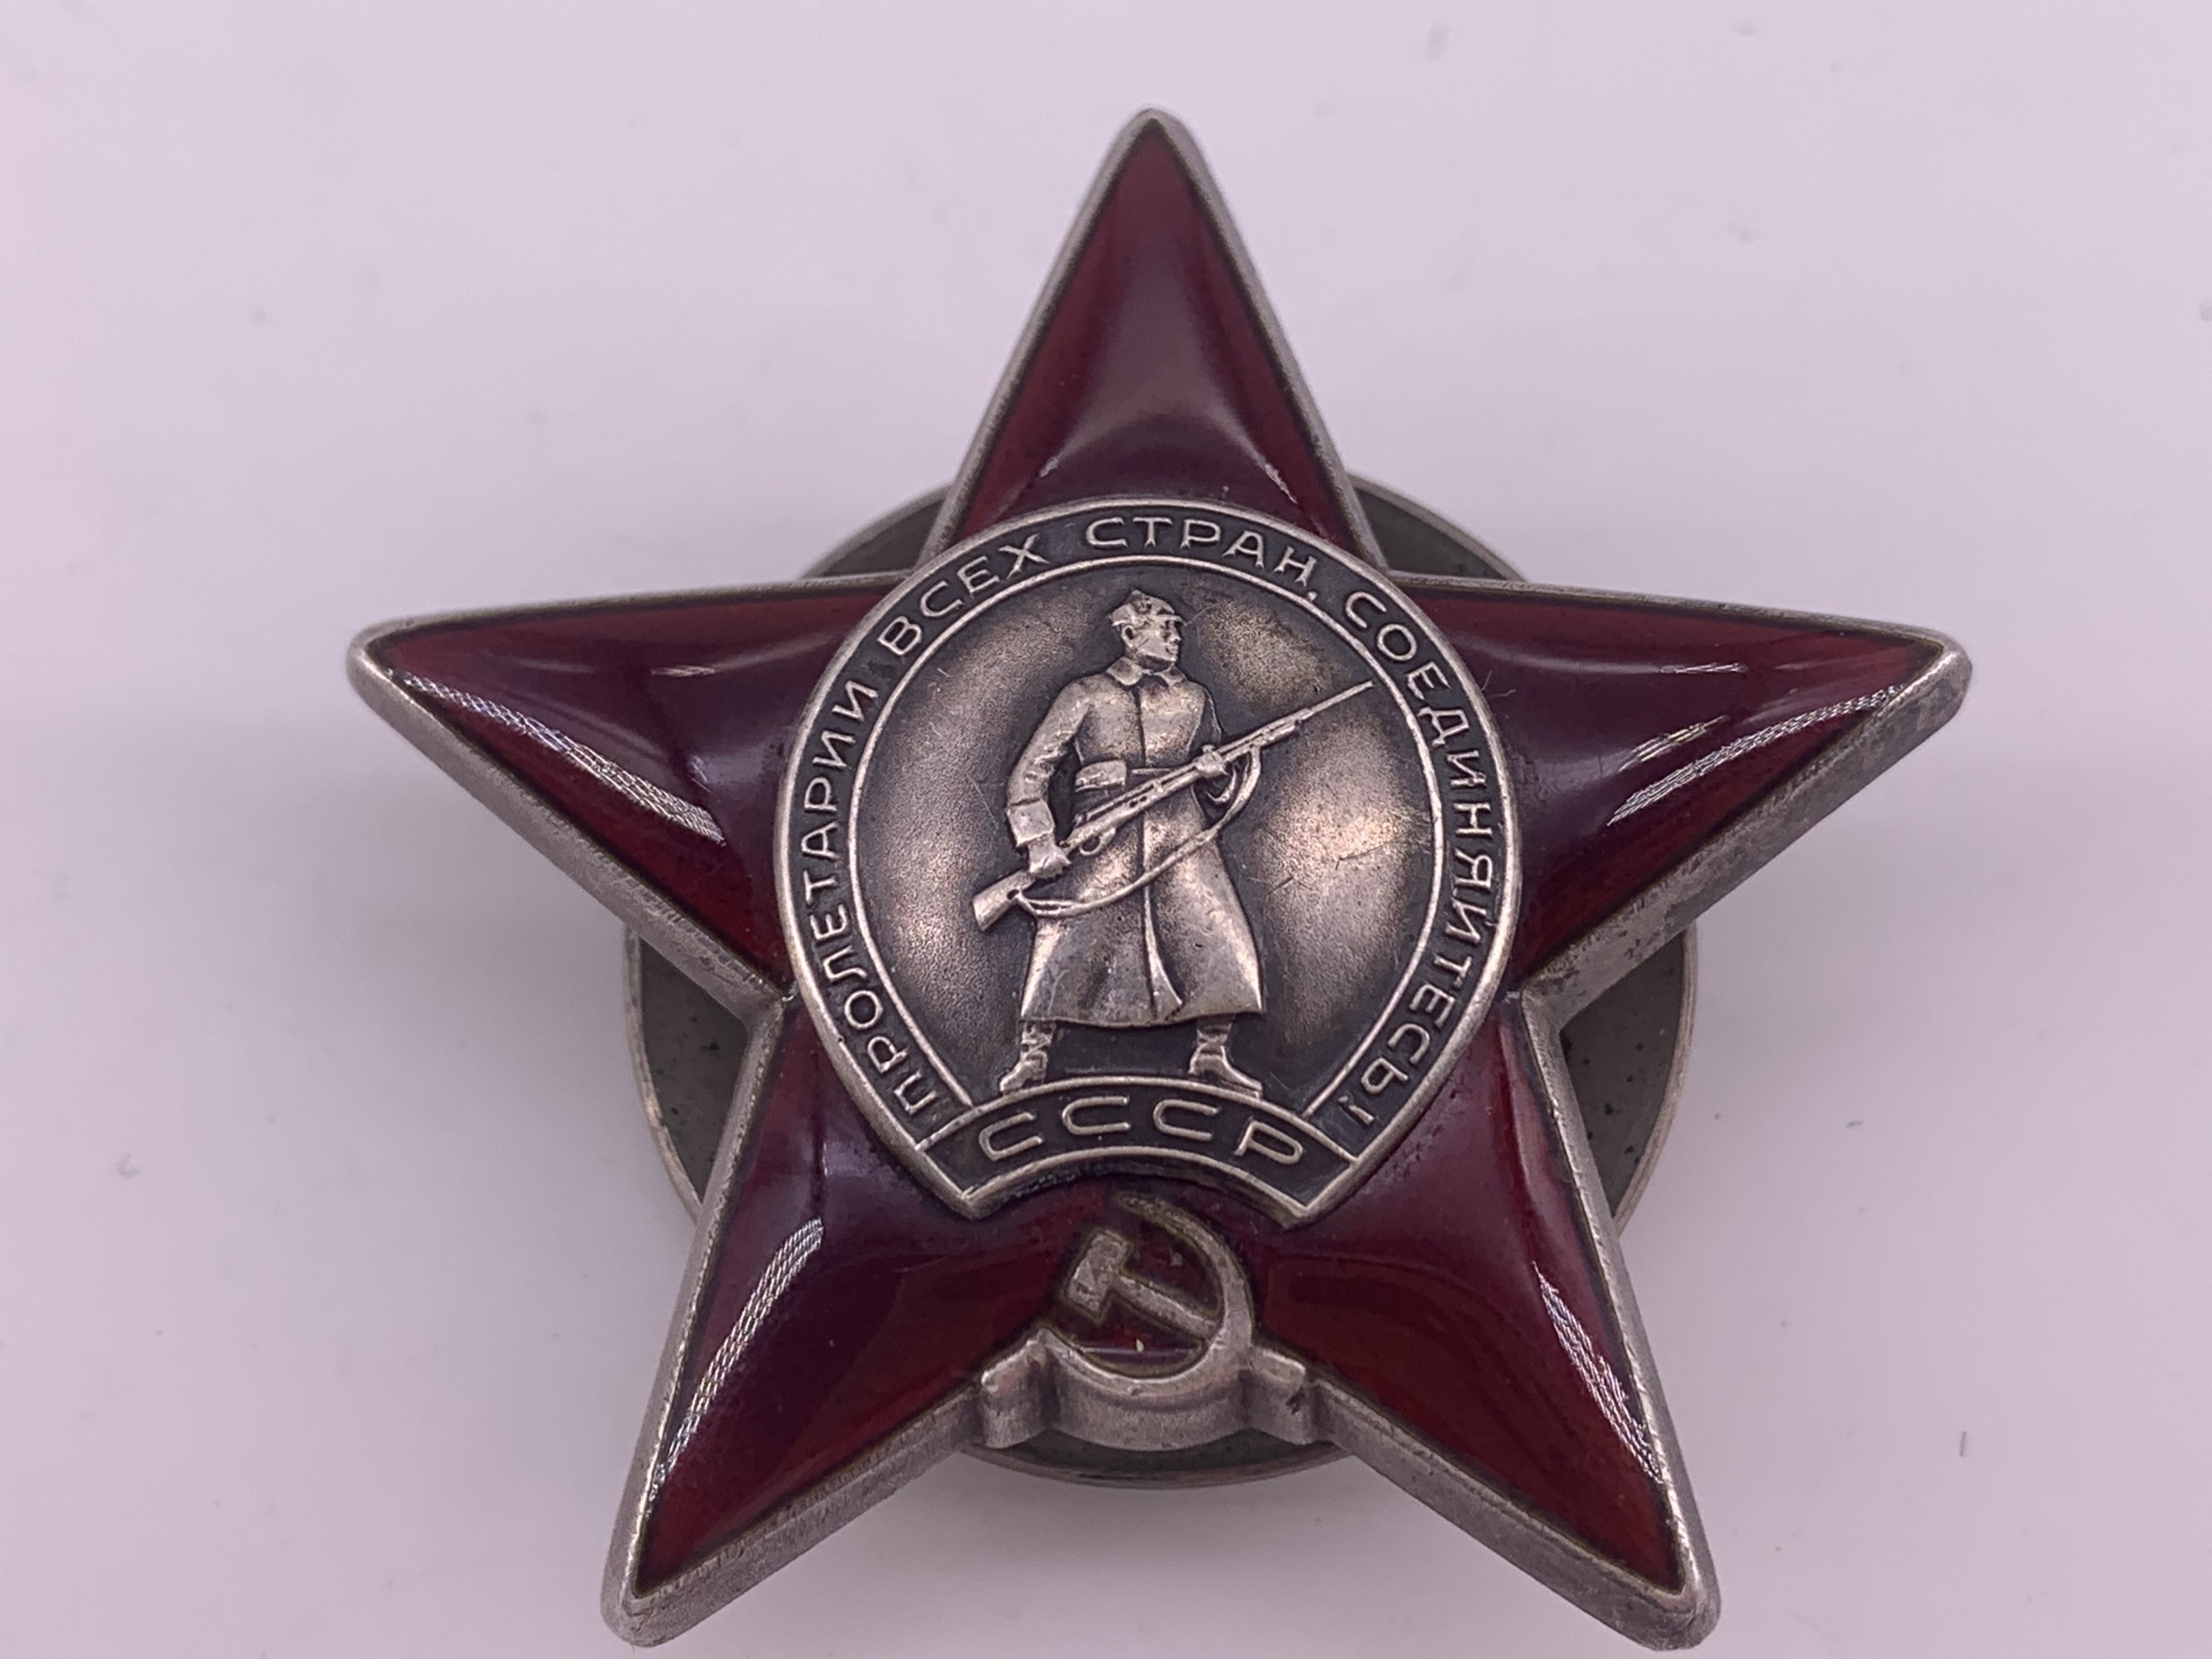 A Soviet Order of the Red Star, numbered 3340797